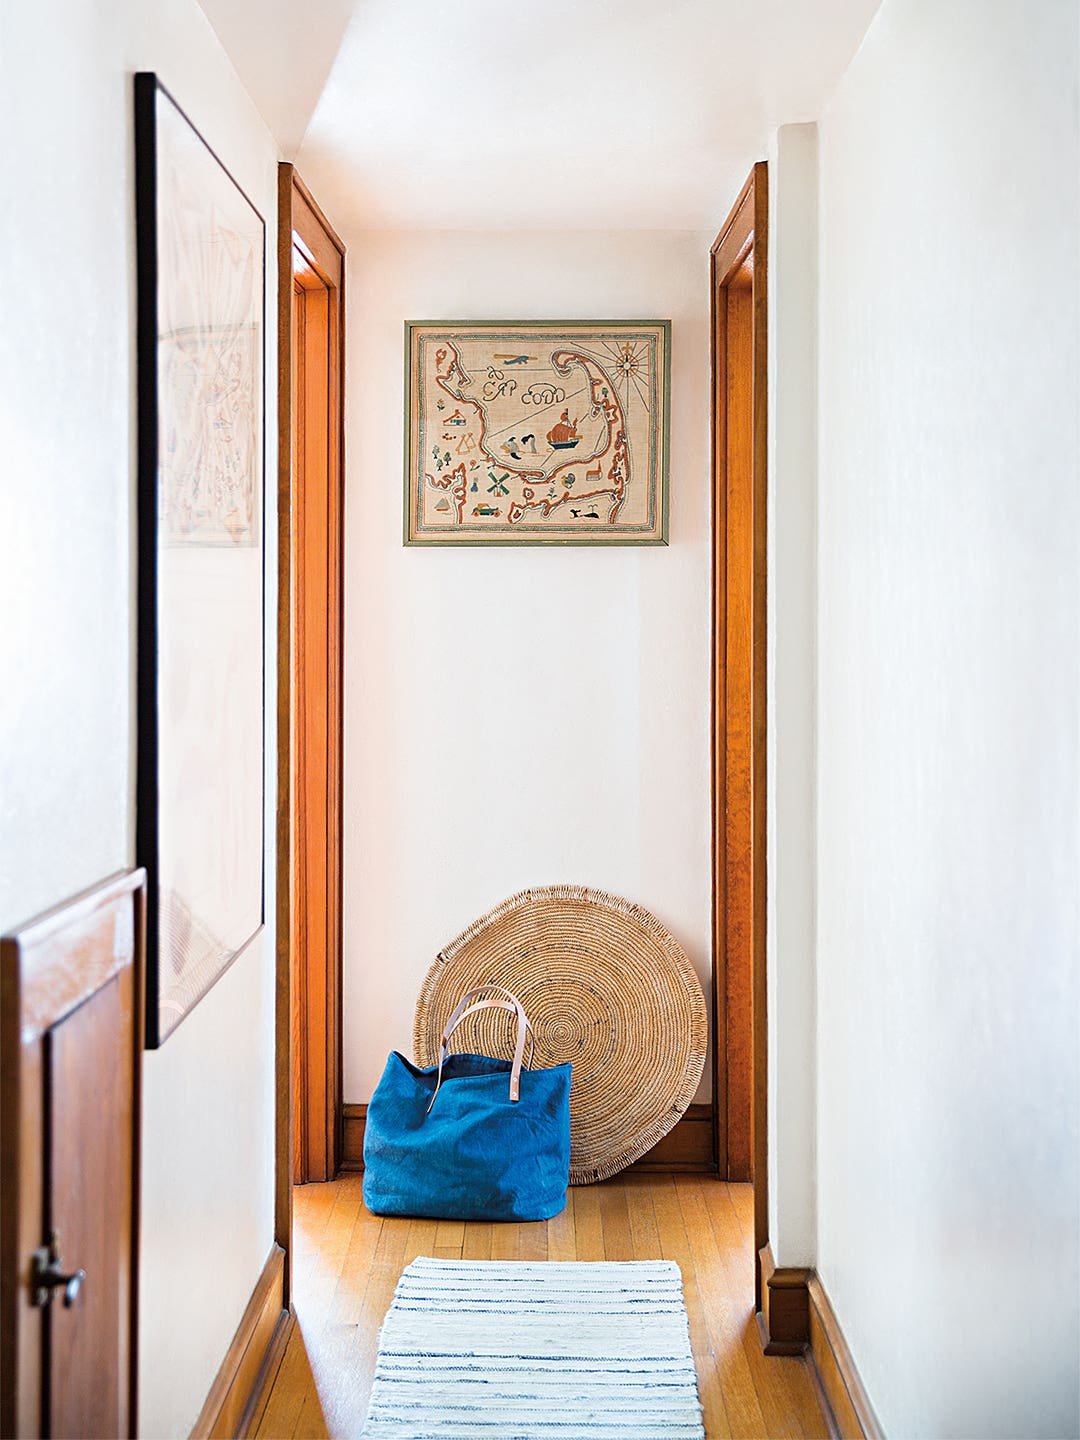 hallway with bag on floro at end